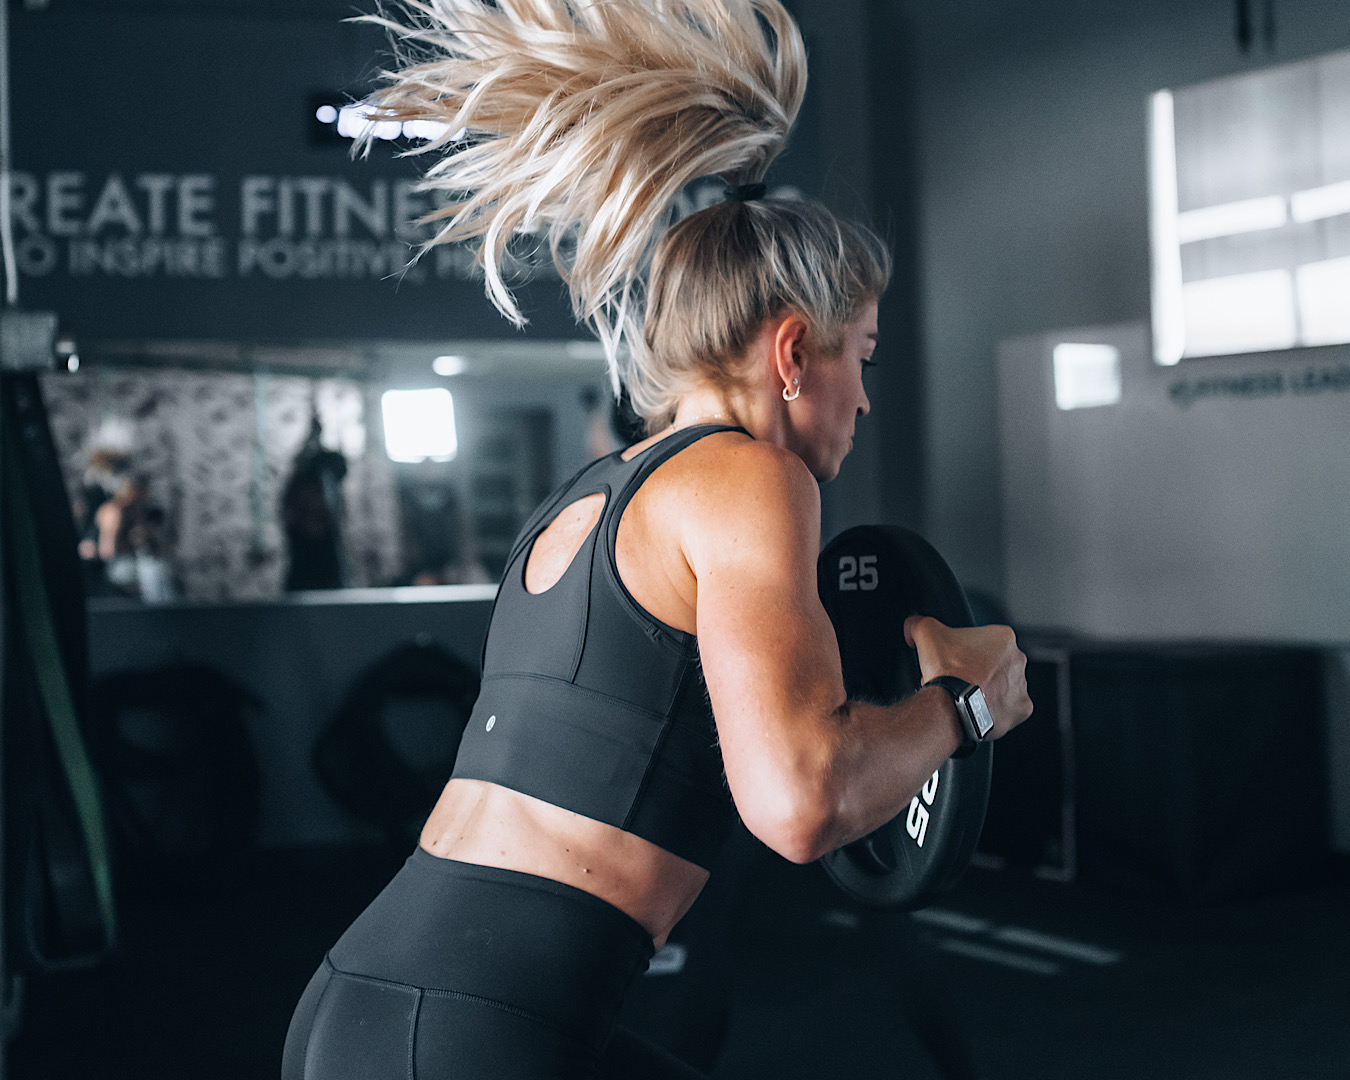 A muscular woman is mid-squat holding a weight plate, her ponytail is flying above her head from momentum. 